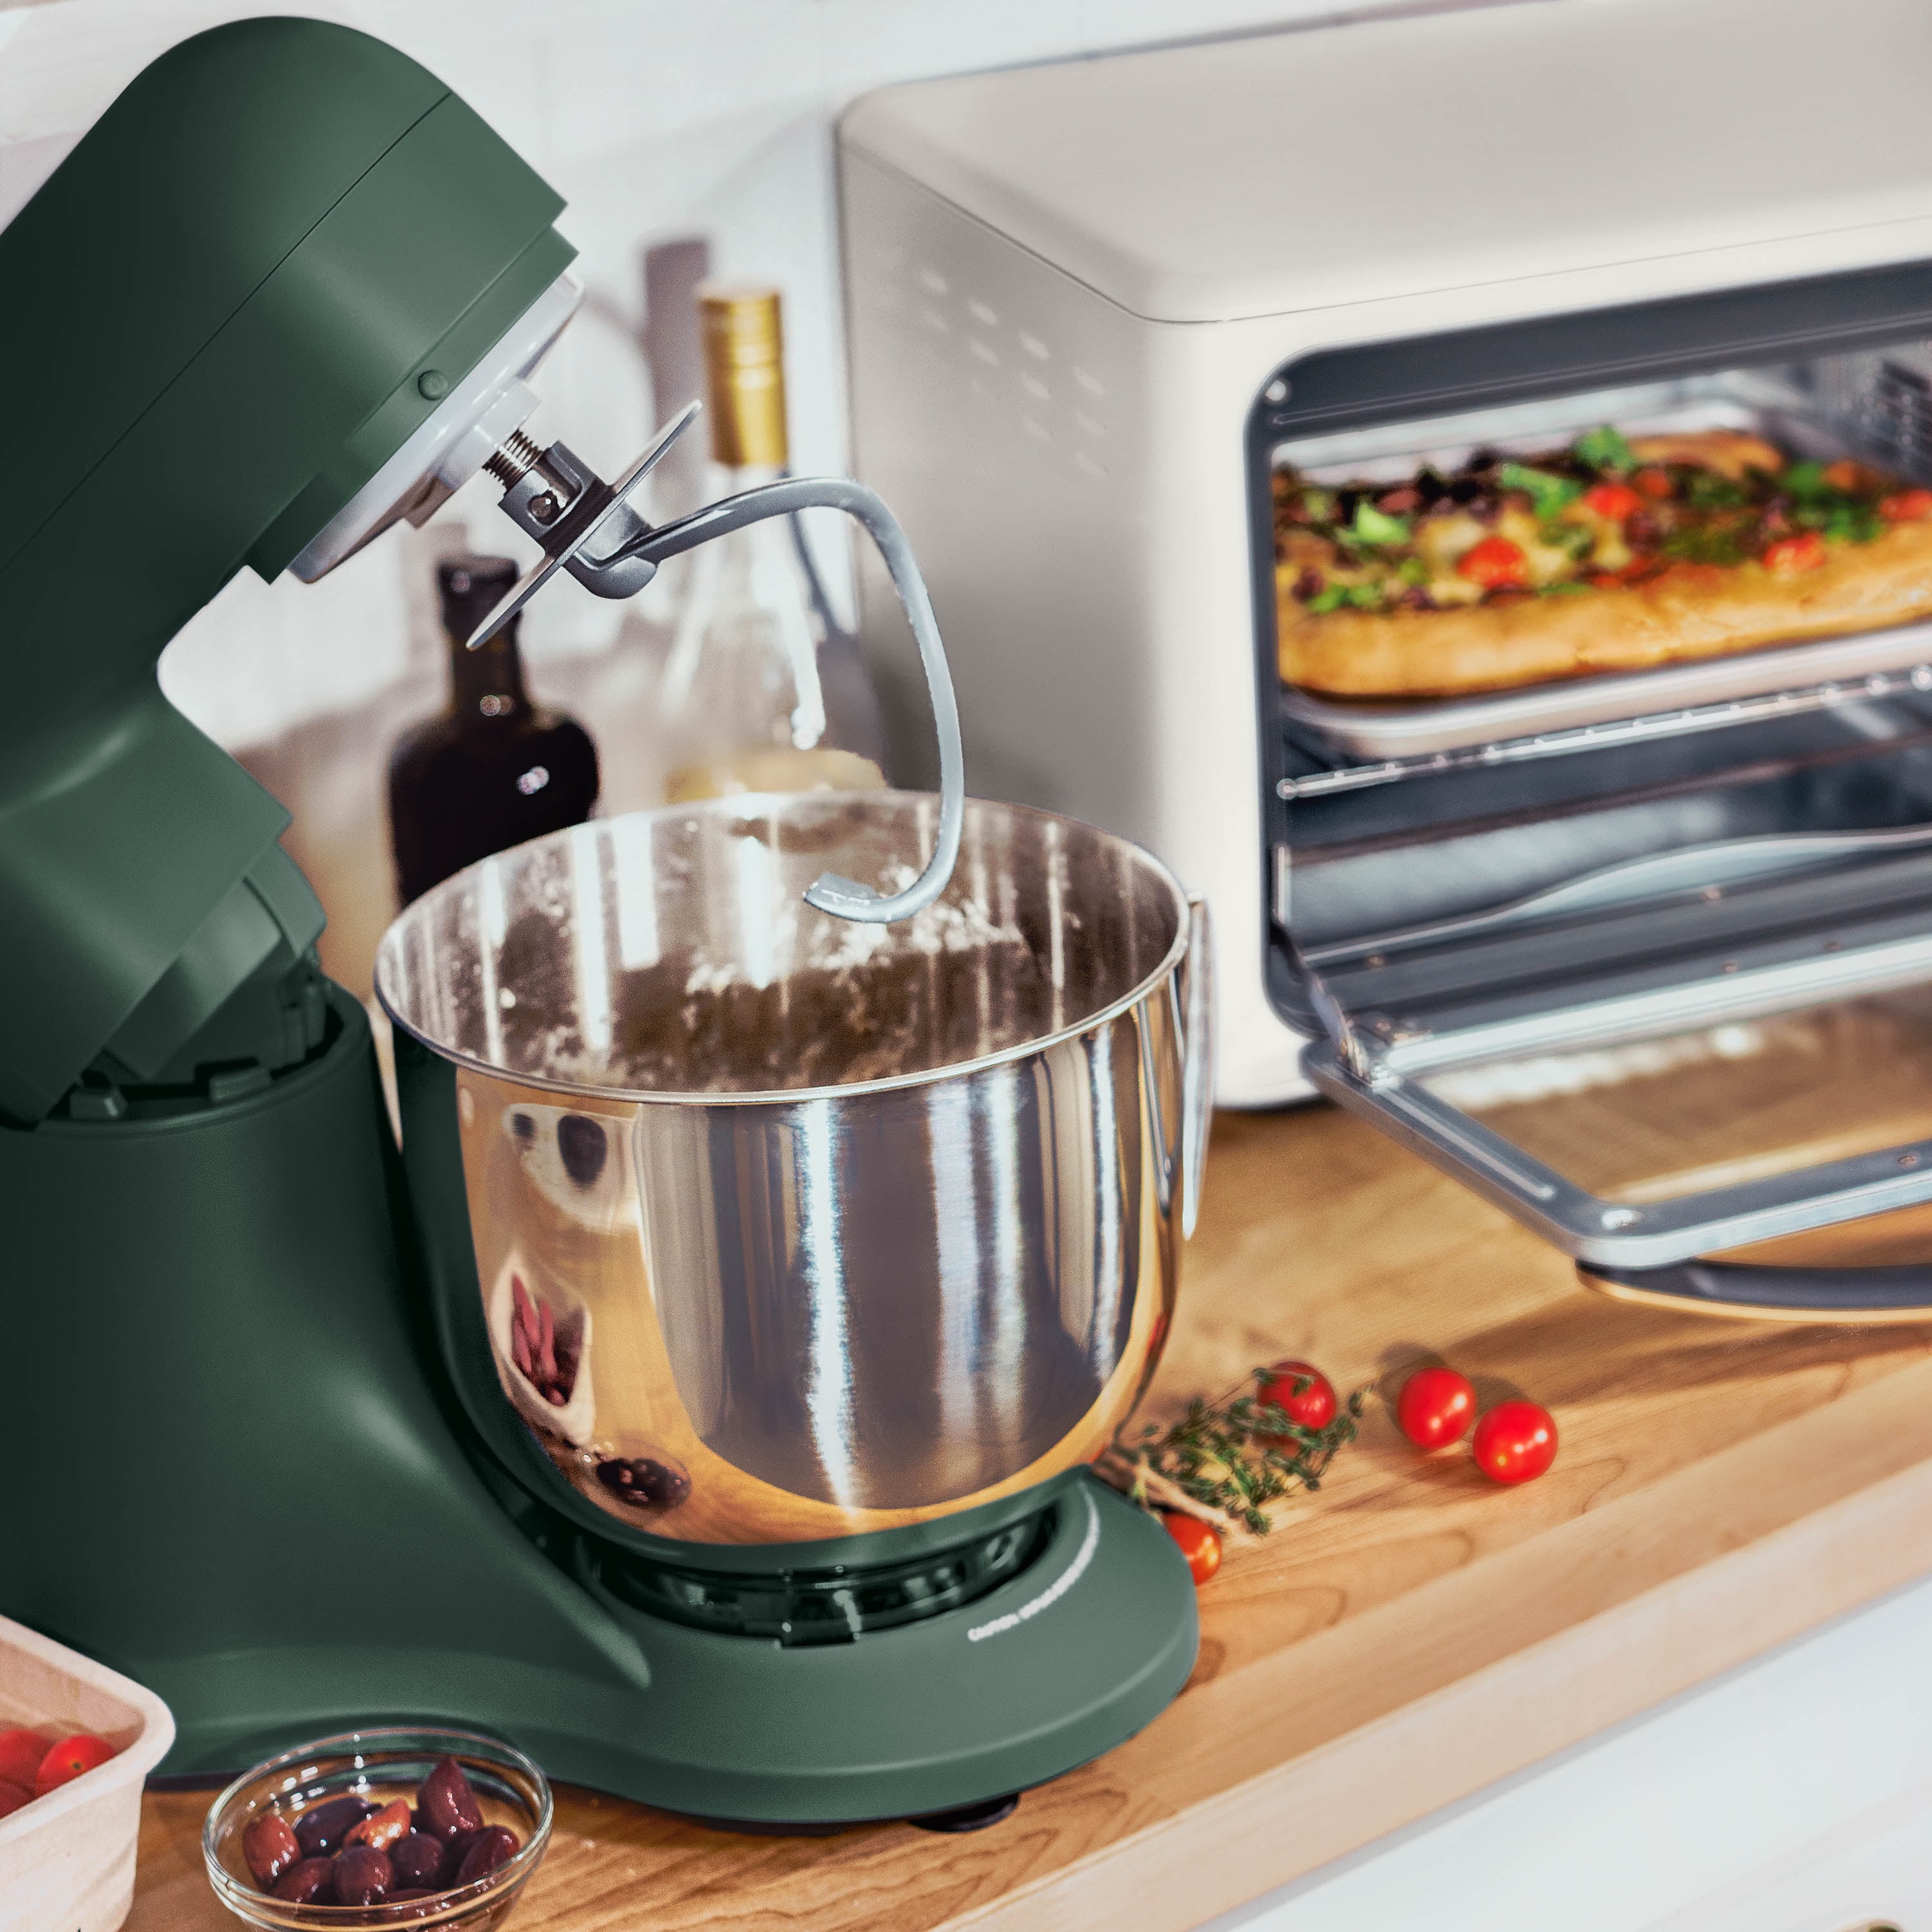 Drew Barrymore's Walmart line debuts a stylish stand mixer